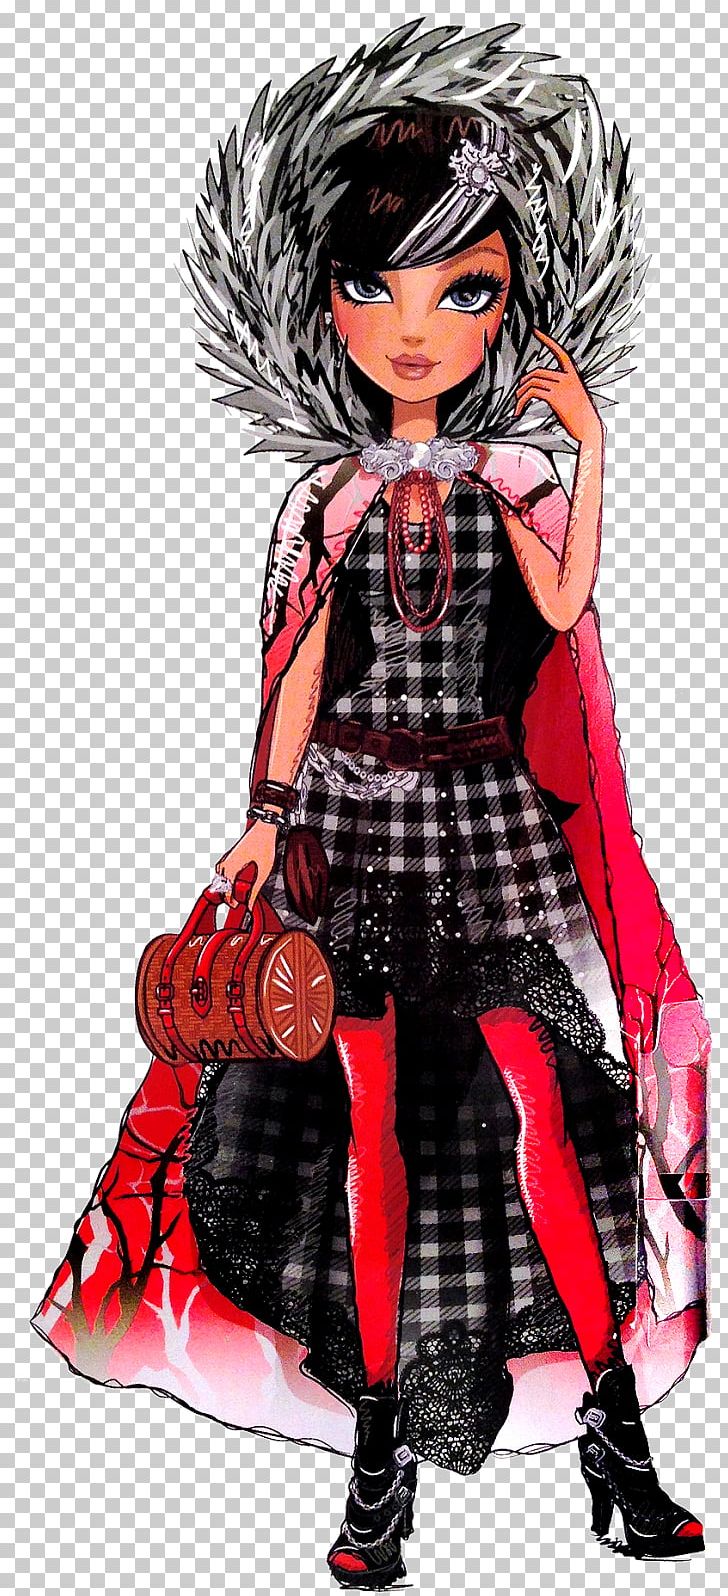 Little Red Riding Hood Ever After High Legacy Day Raven Queen Doll Ever After High Legacy Day Raven Queen Doll Big Bad Wolf PNG, Clipart, Art, Black Hair, Child, Doll, Fairy Tale Free PNG Download